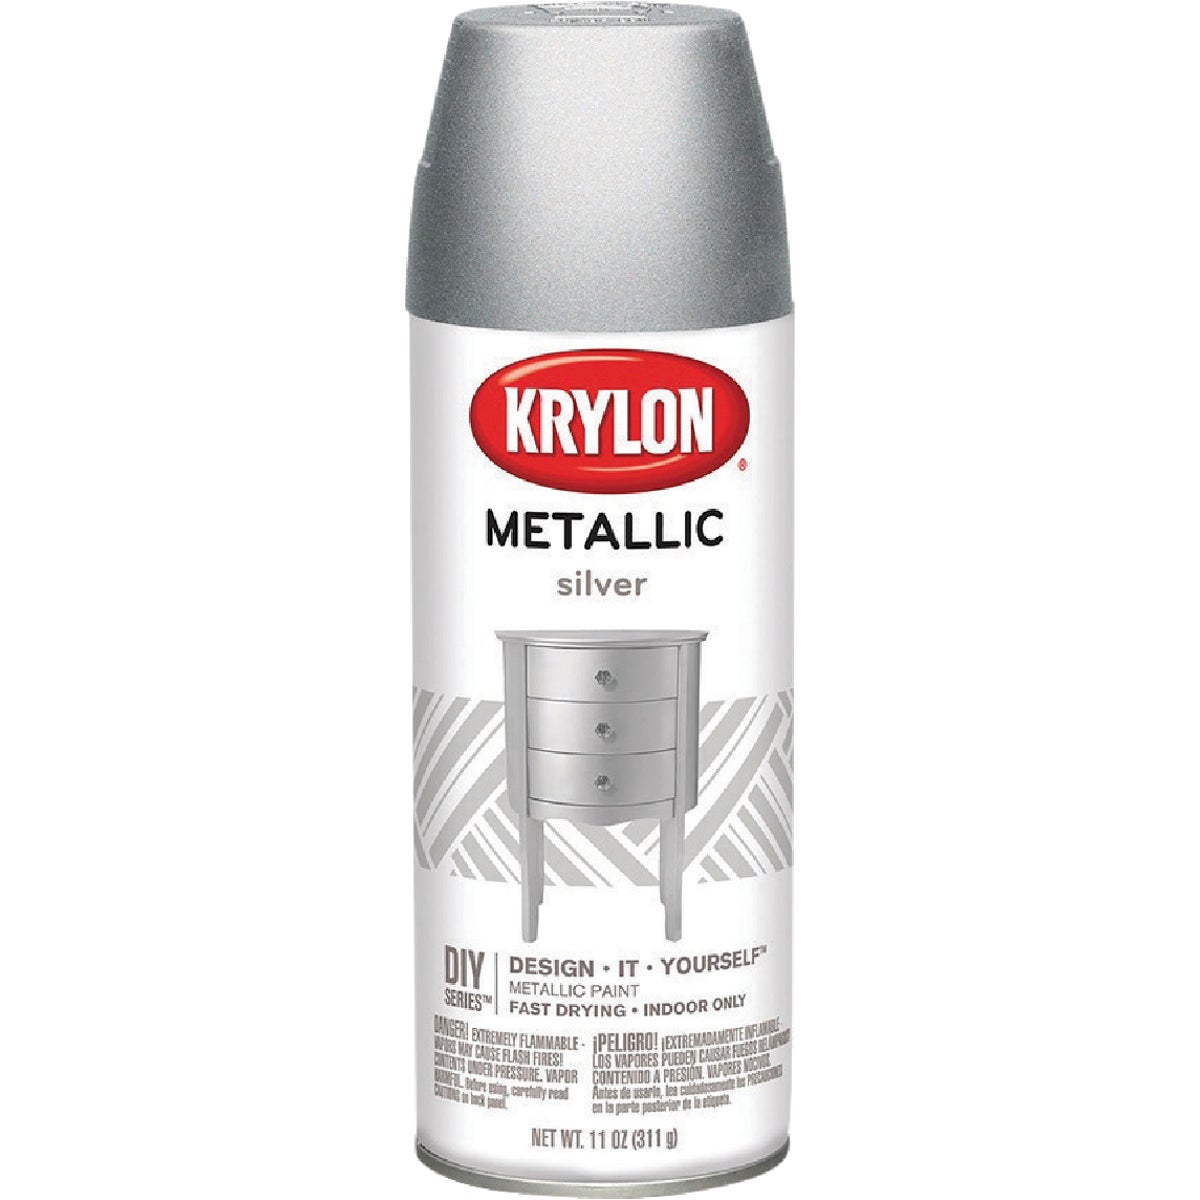 Item 794880, All-purpose metallic spray paint containing millions of metal flakes for a 